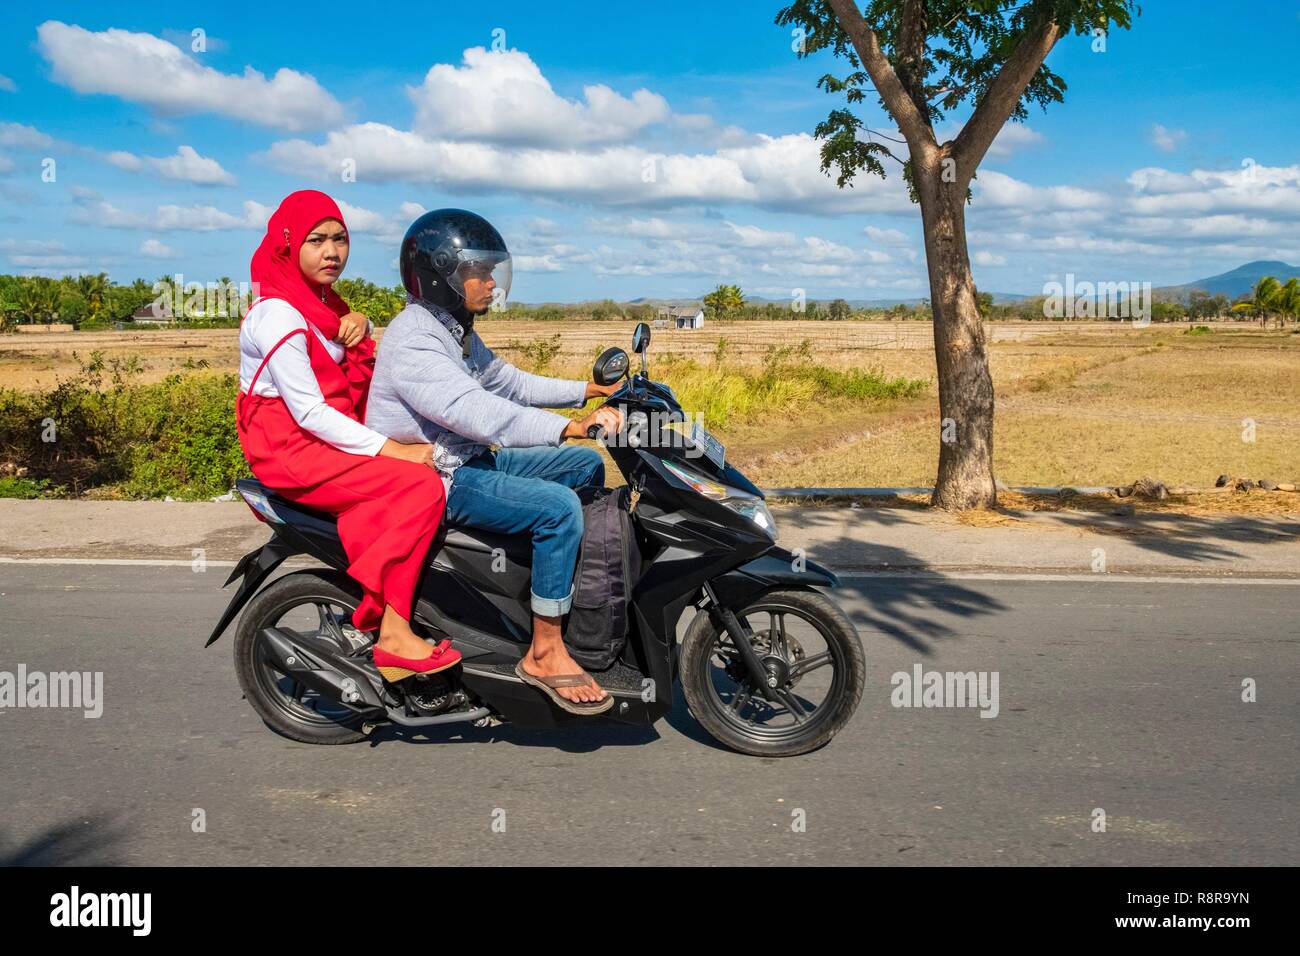 Indonesia, Lombok, Muslim couple on a motorcycle Stock Photo